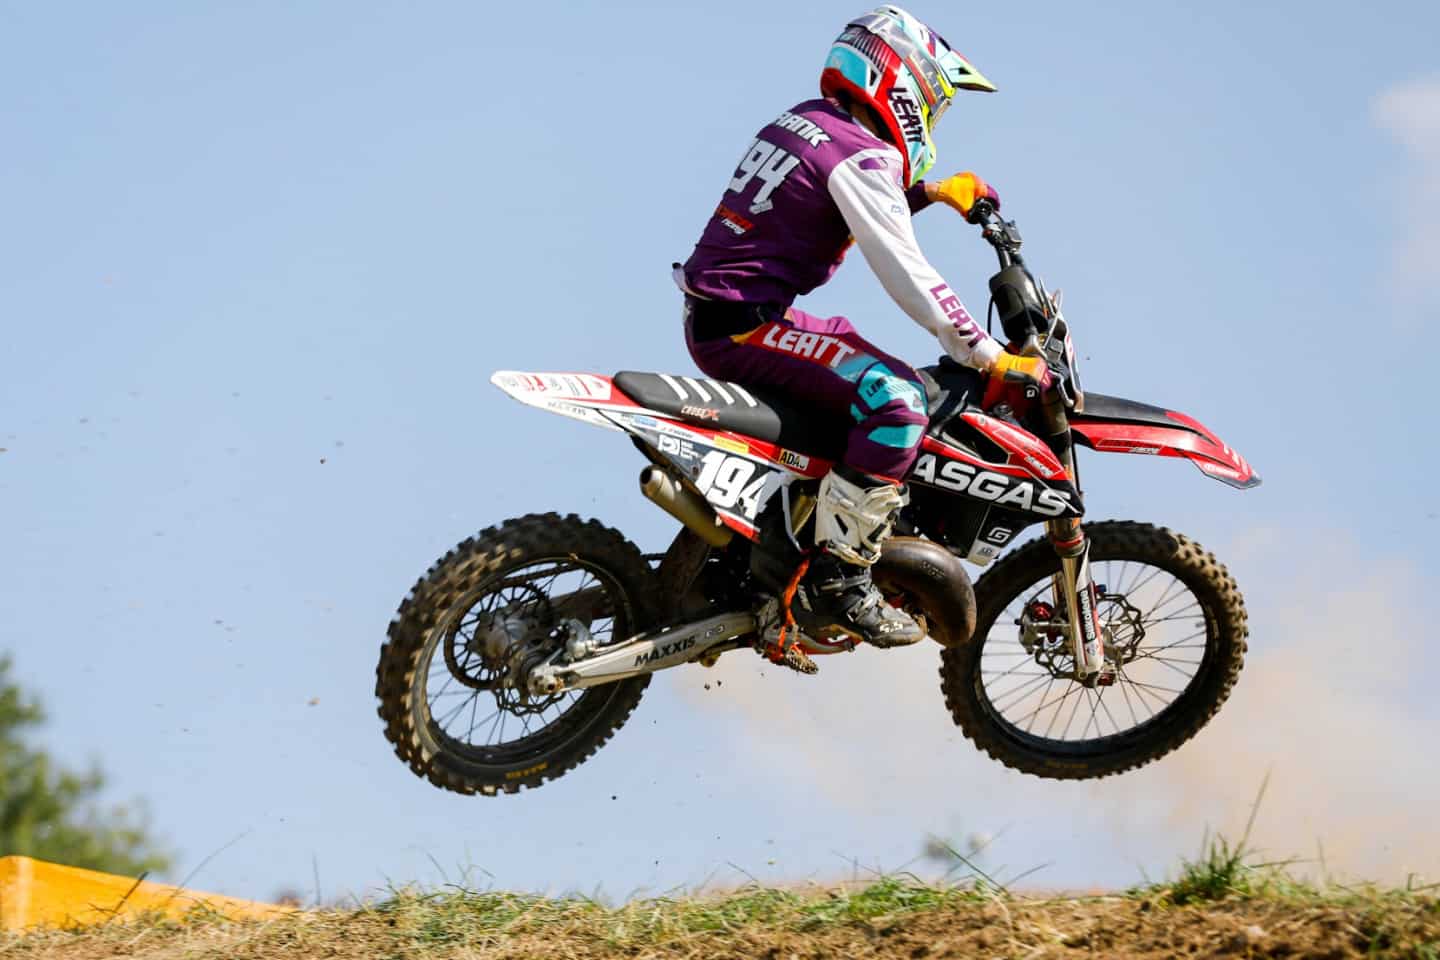 PM Becker Racing – ADAC MX Masters in Holzgerlingen